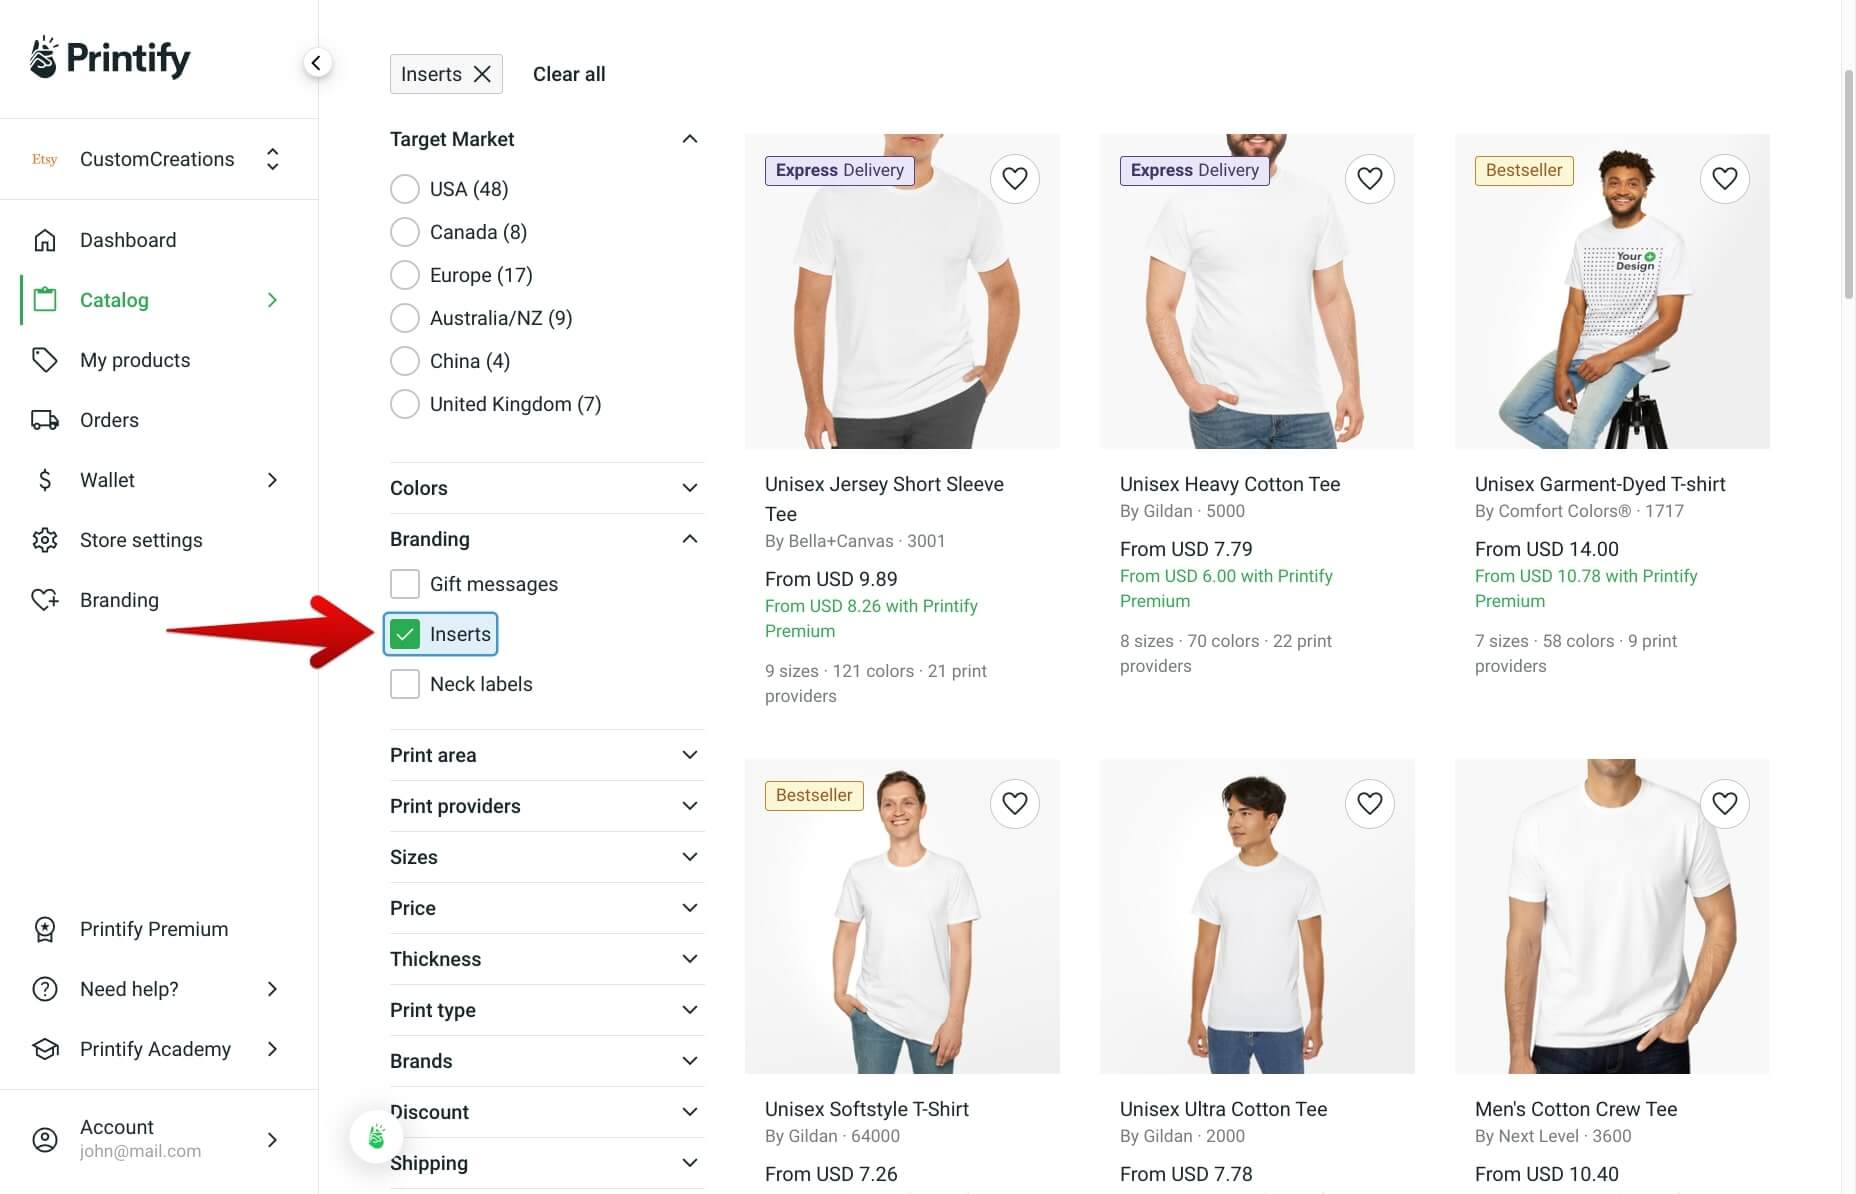 Left sidebar of Printify's Product Catalog, with the “Inserts” box checked under the Branding dropdown section.